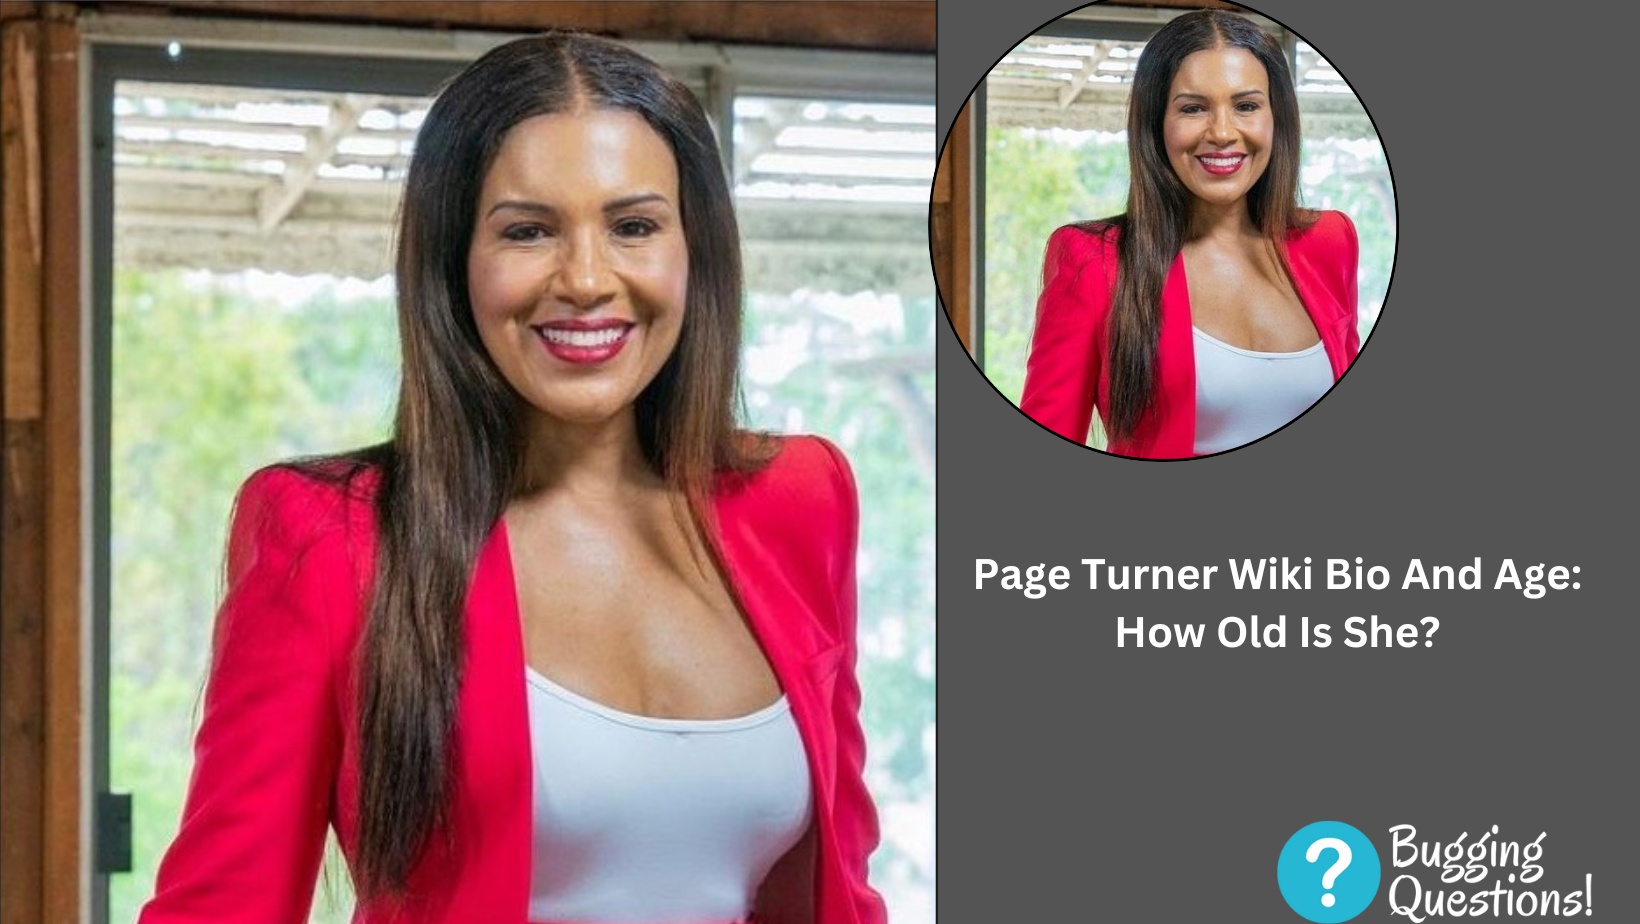 Page Turner Wiki Bio And Age: How Old Is She?